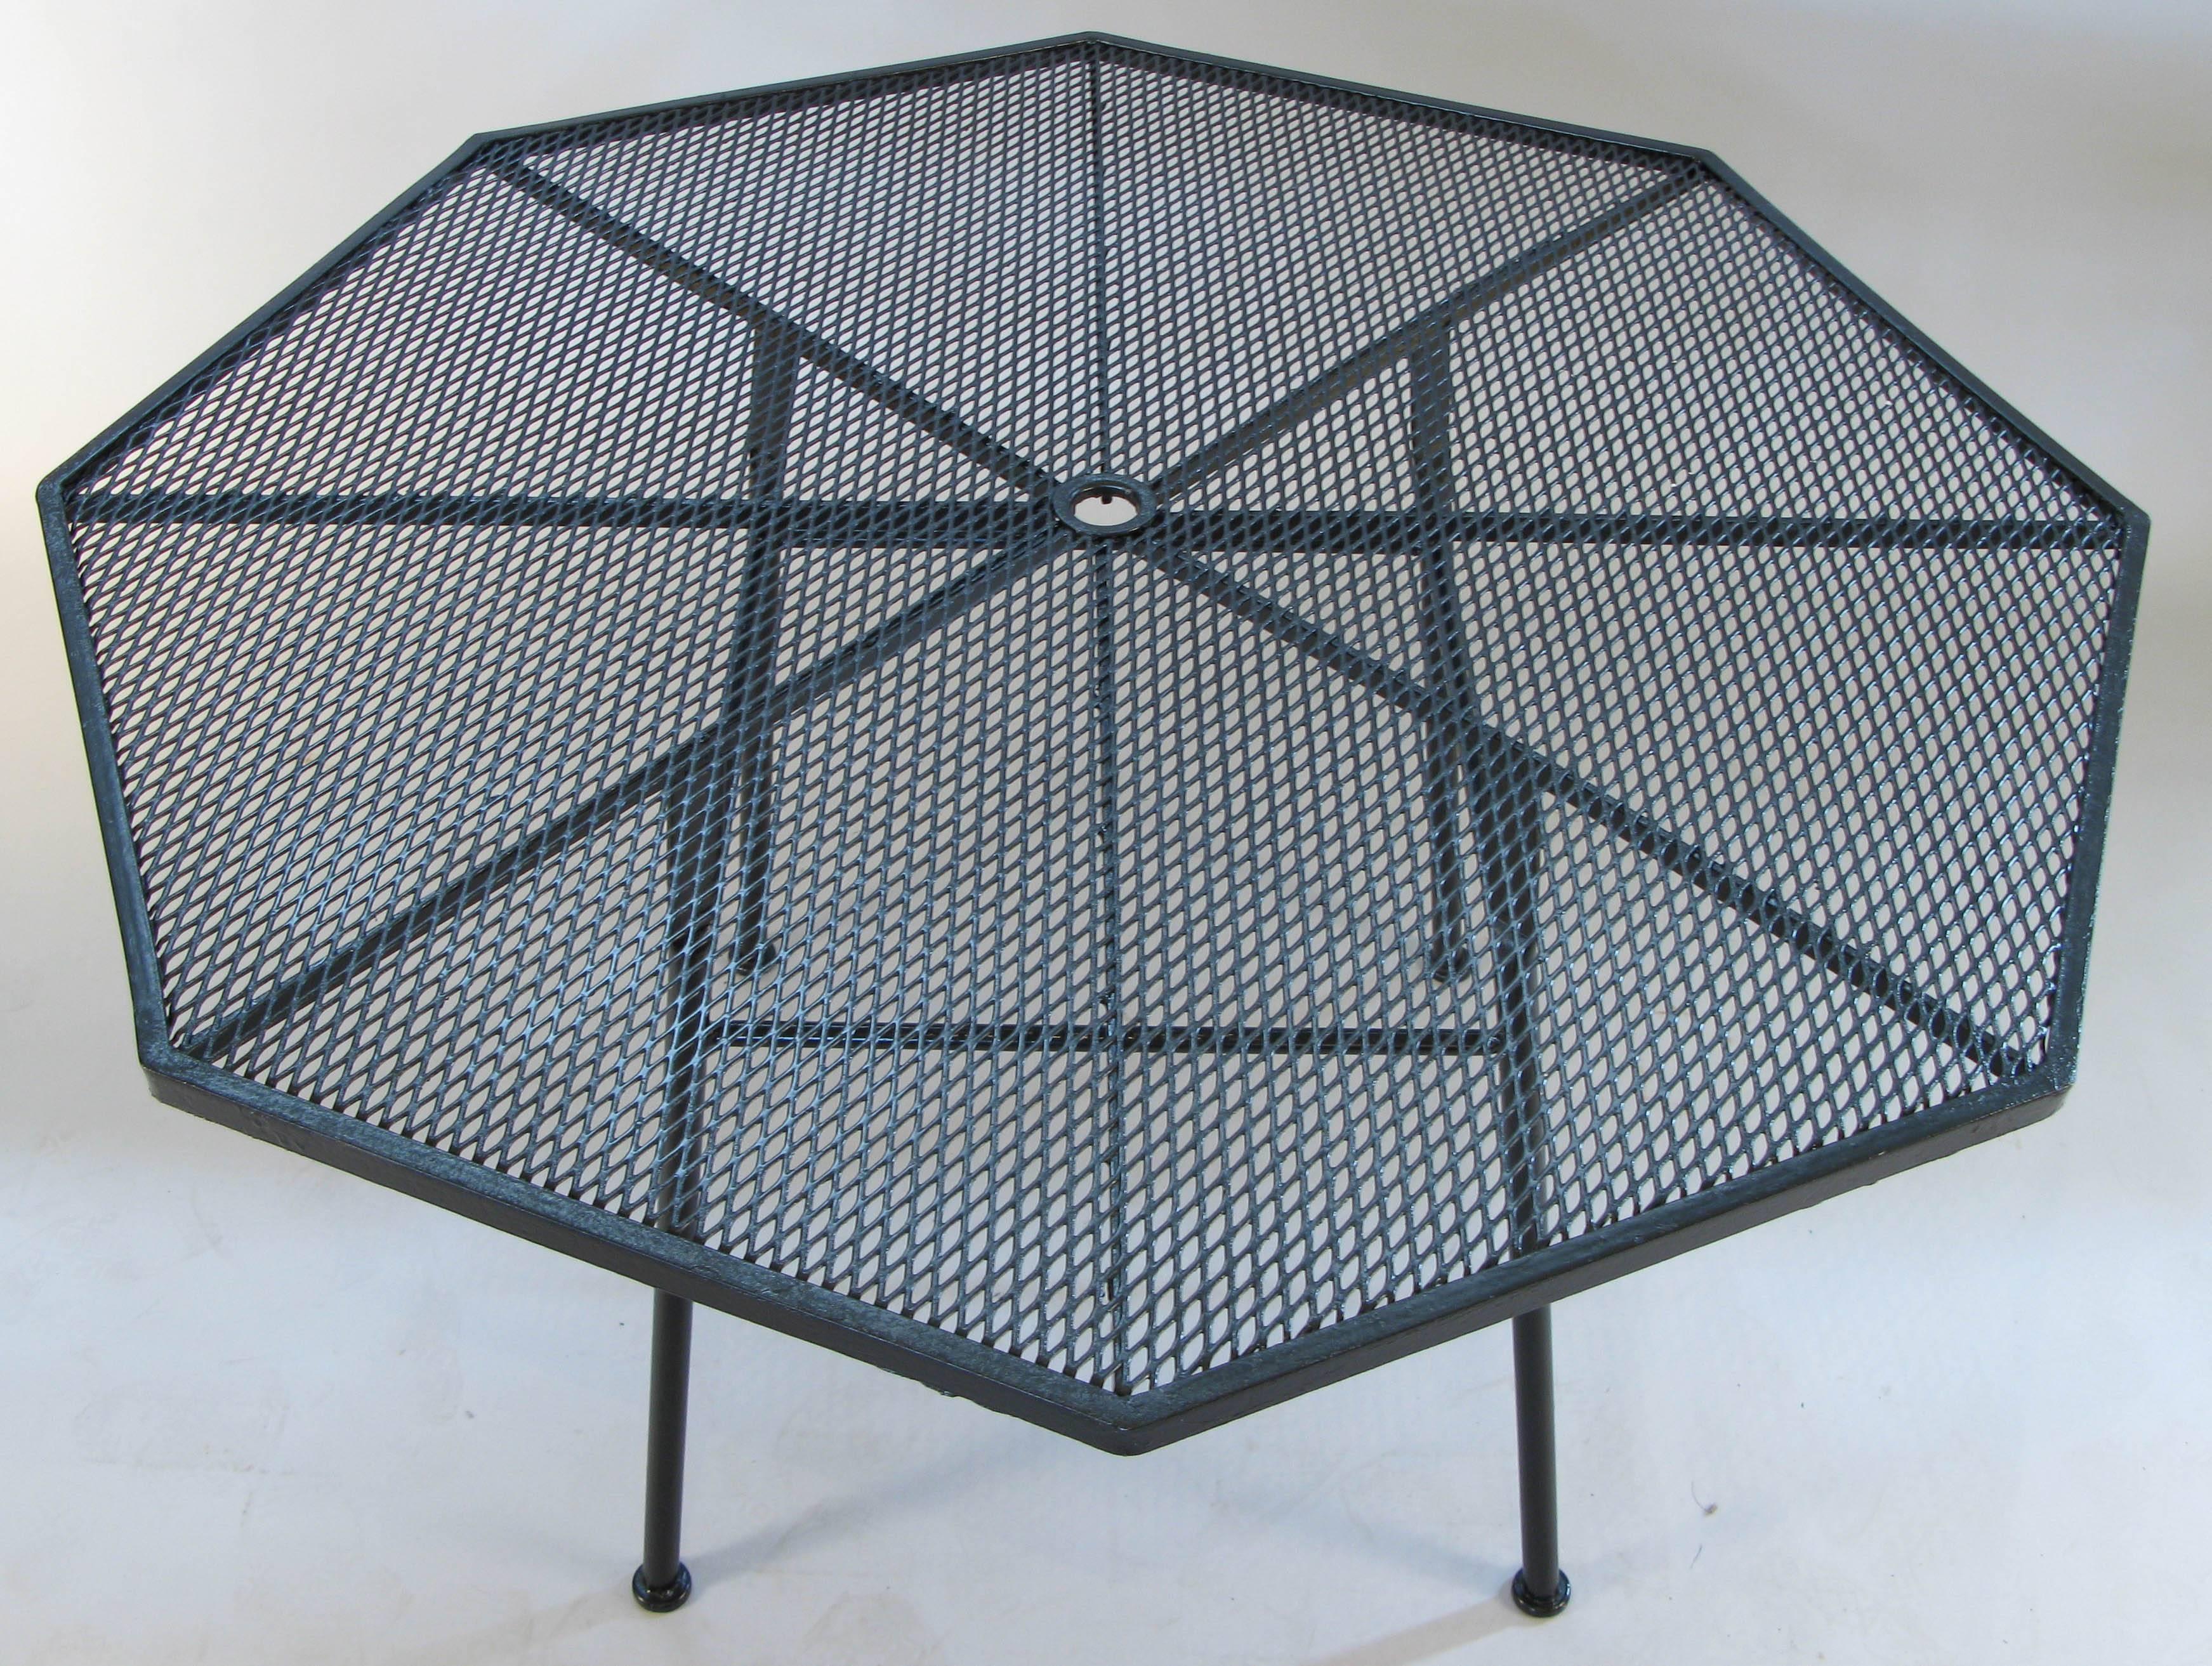 A 1950s octagonal dining table by Russell Woodard in wrought iron and steel mesh from his 1950s Sculptura collection. recently refinished in Greige. we also have sets of Sculptura dining chairs in separate listings.